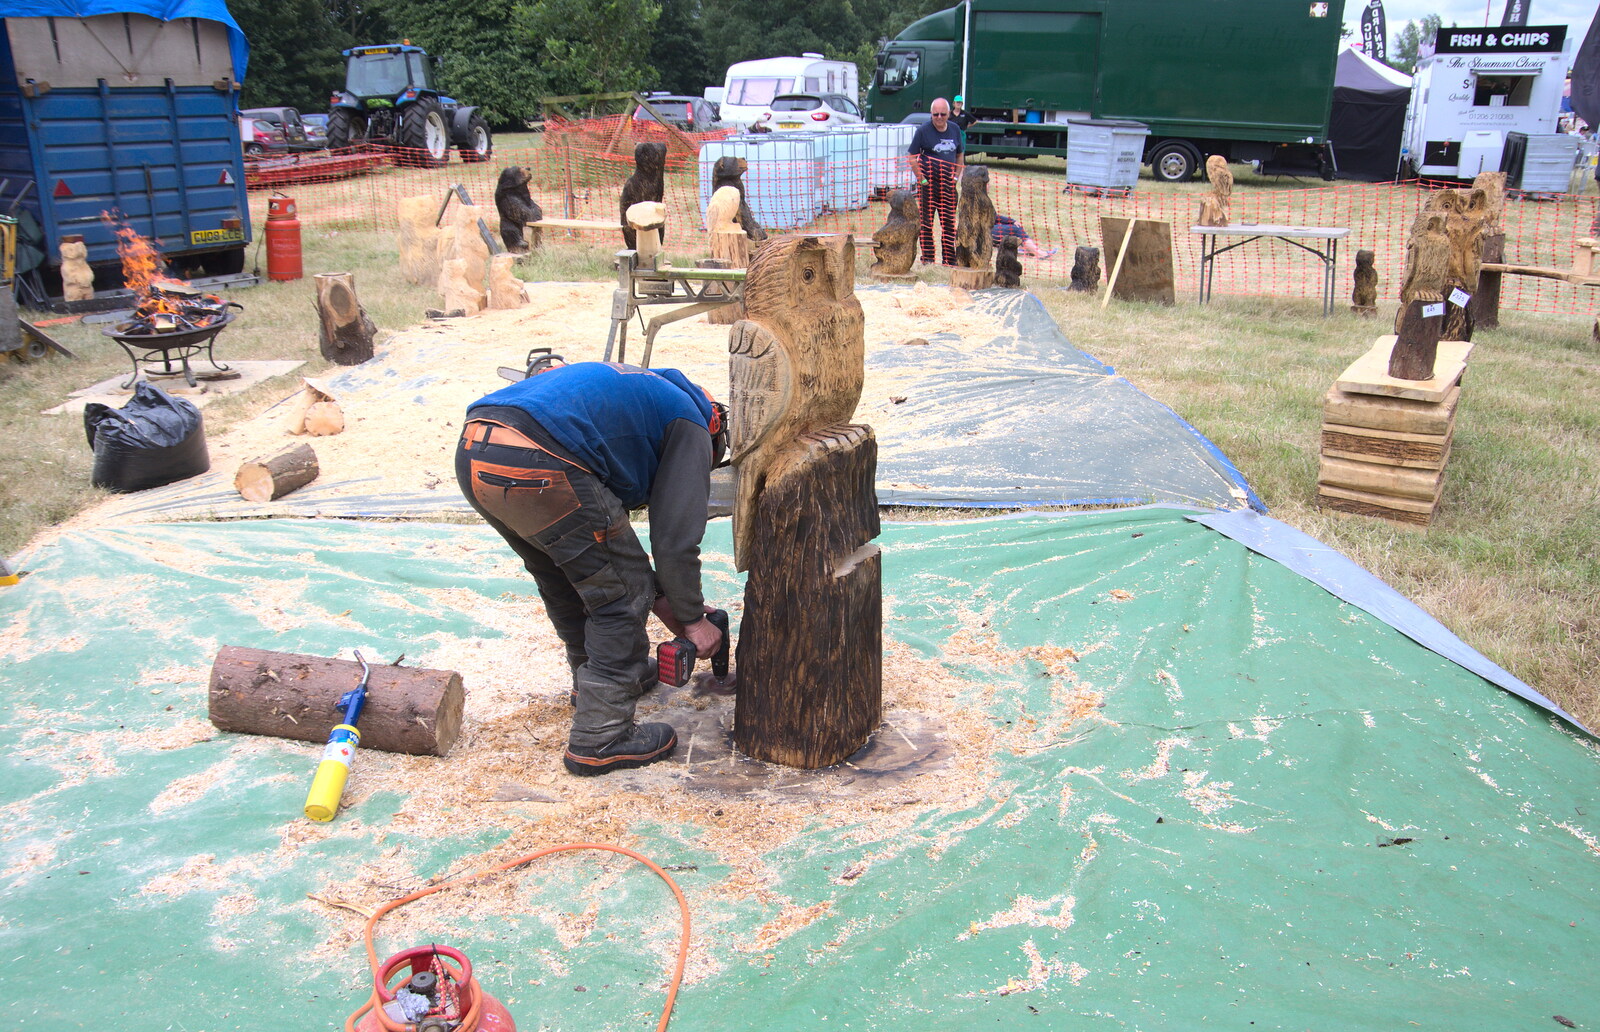 A bit of chain-saw sculpture occurs from The Formerly-Known-As-The-Eye-Show, Palgrave, Suffolk - 17th June 2018